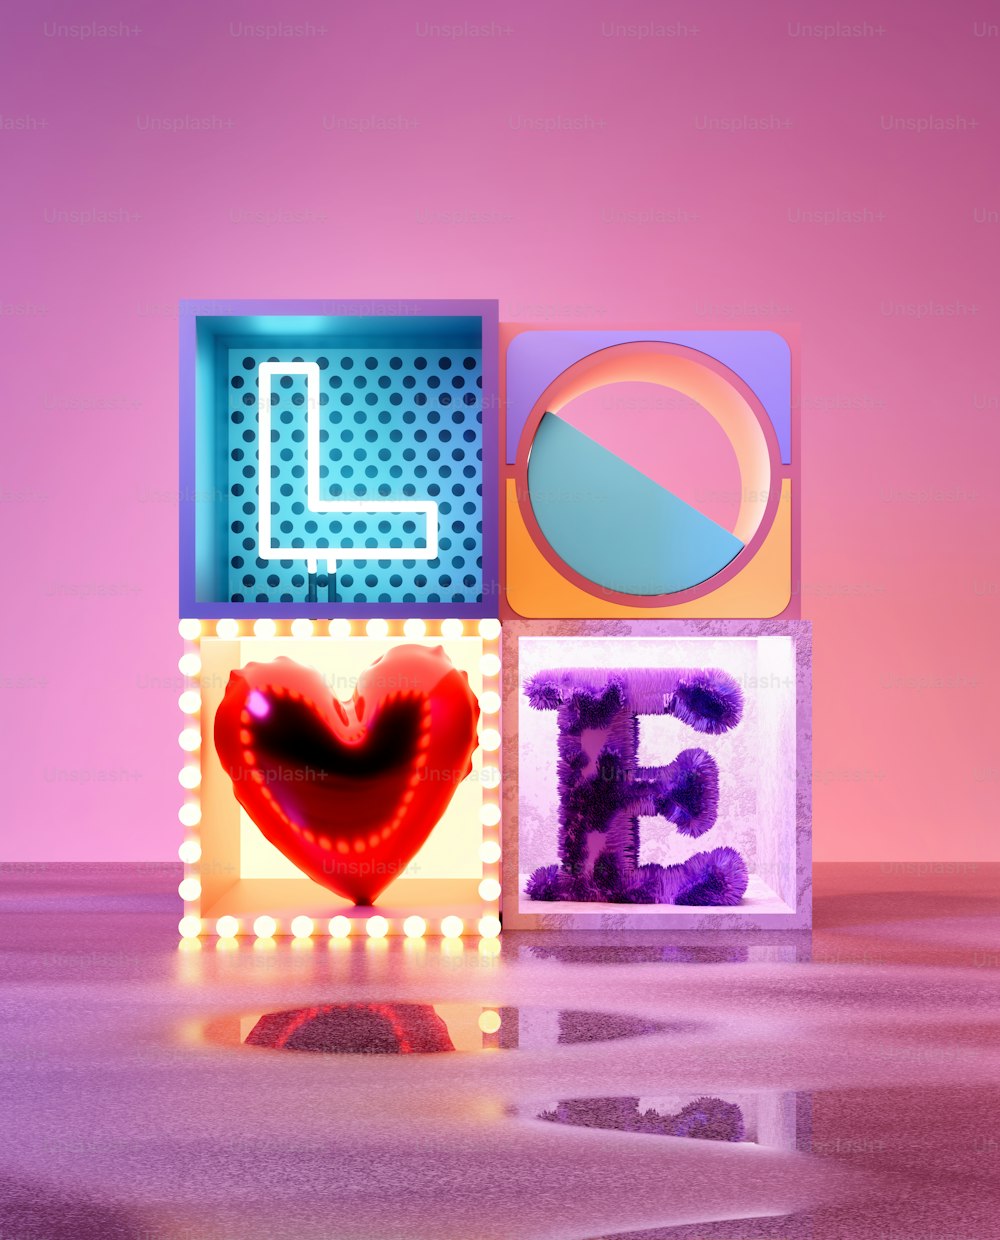 The word LOVE made from blocks and various materials and textures. 3D illustration